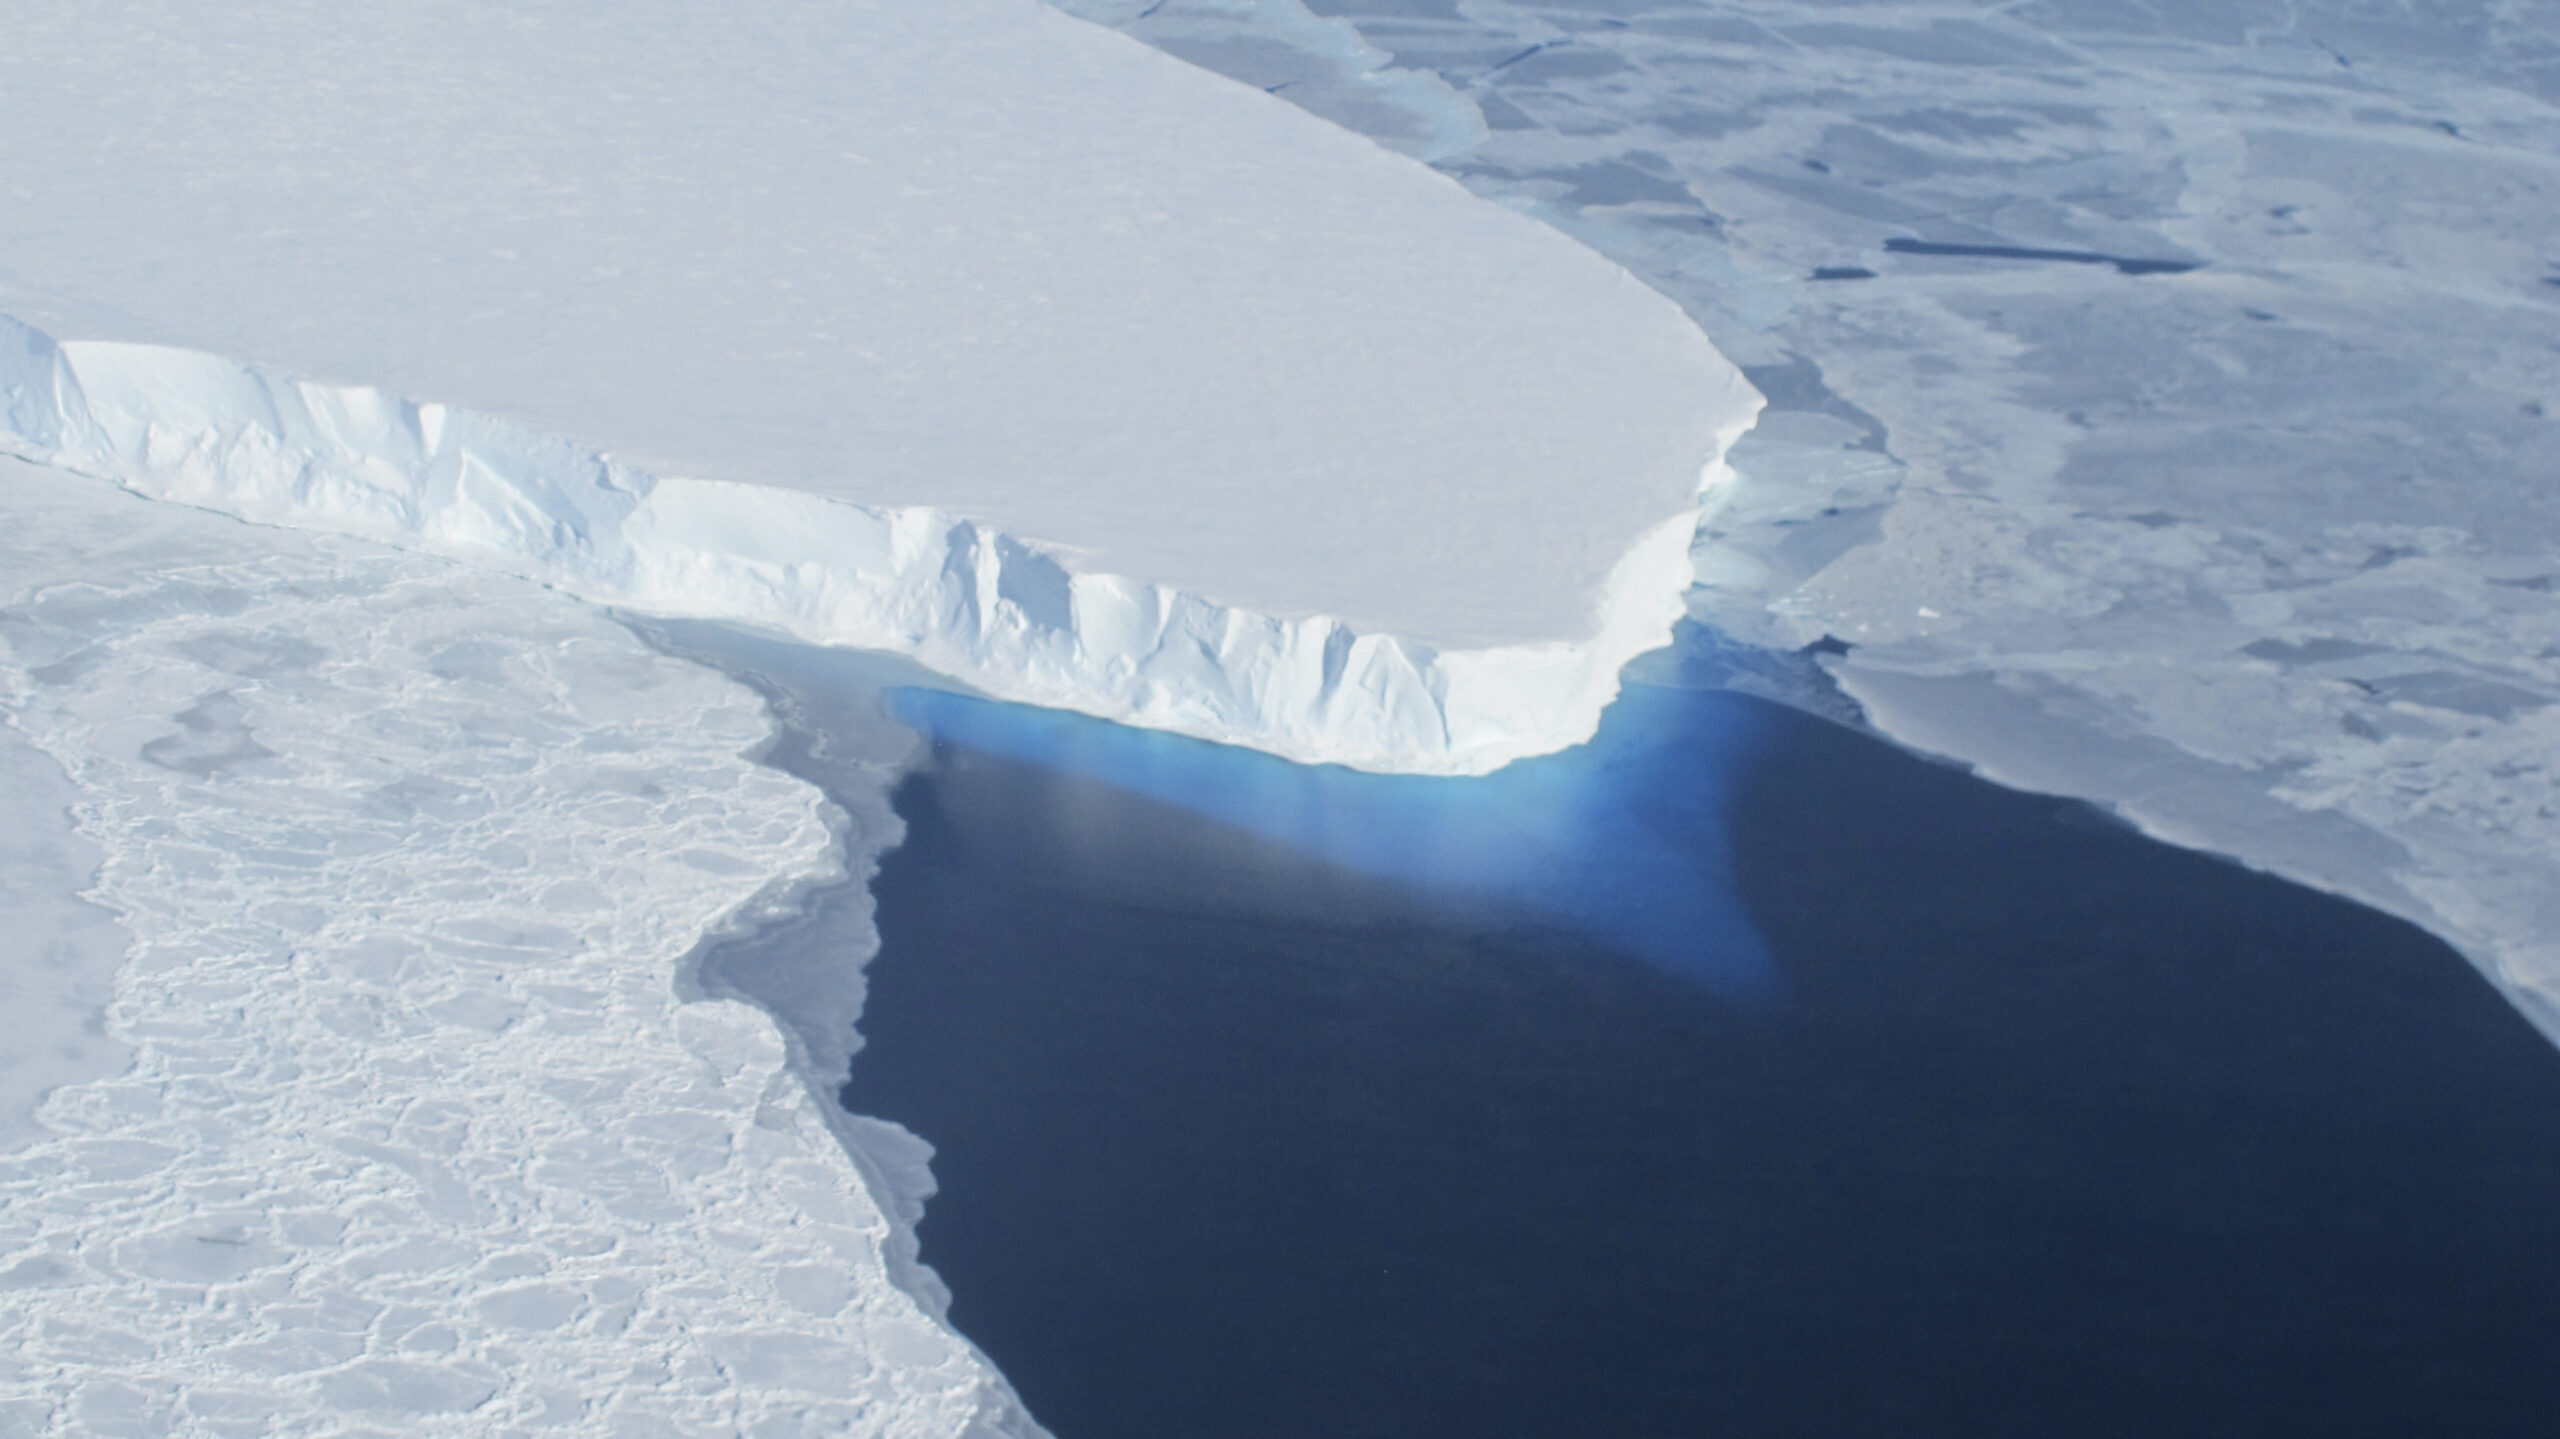 New research on Antarctica’s Thwaites Glacier could reshape sea-level rise predictions